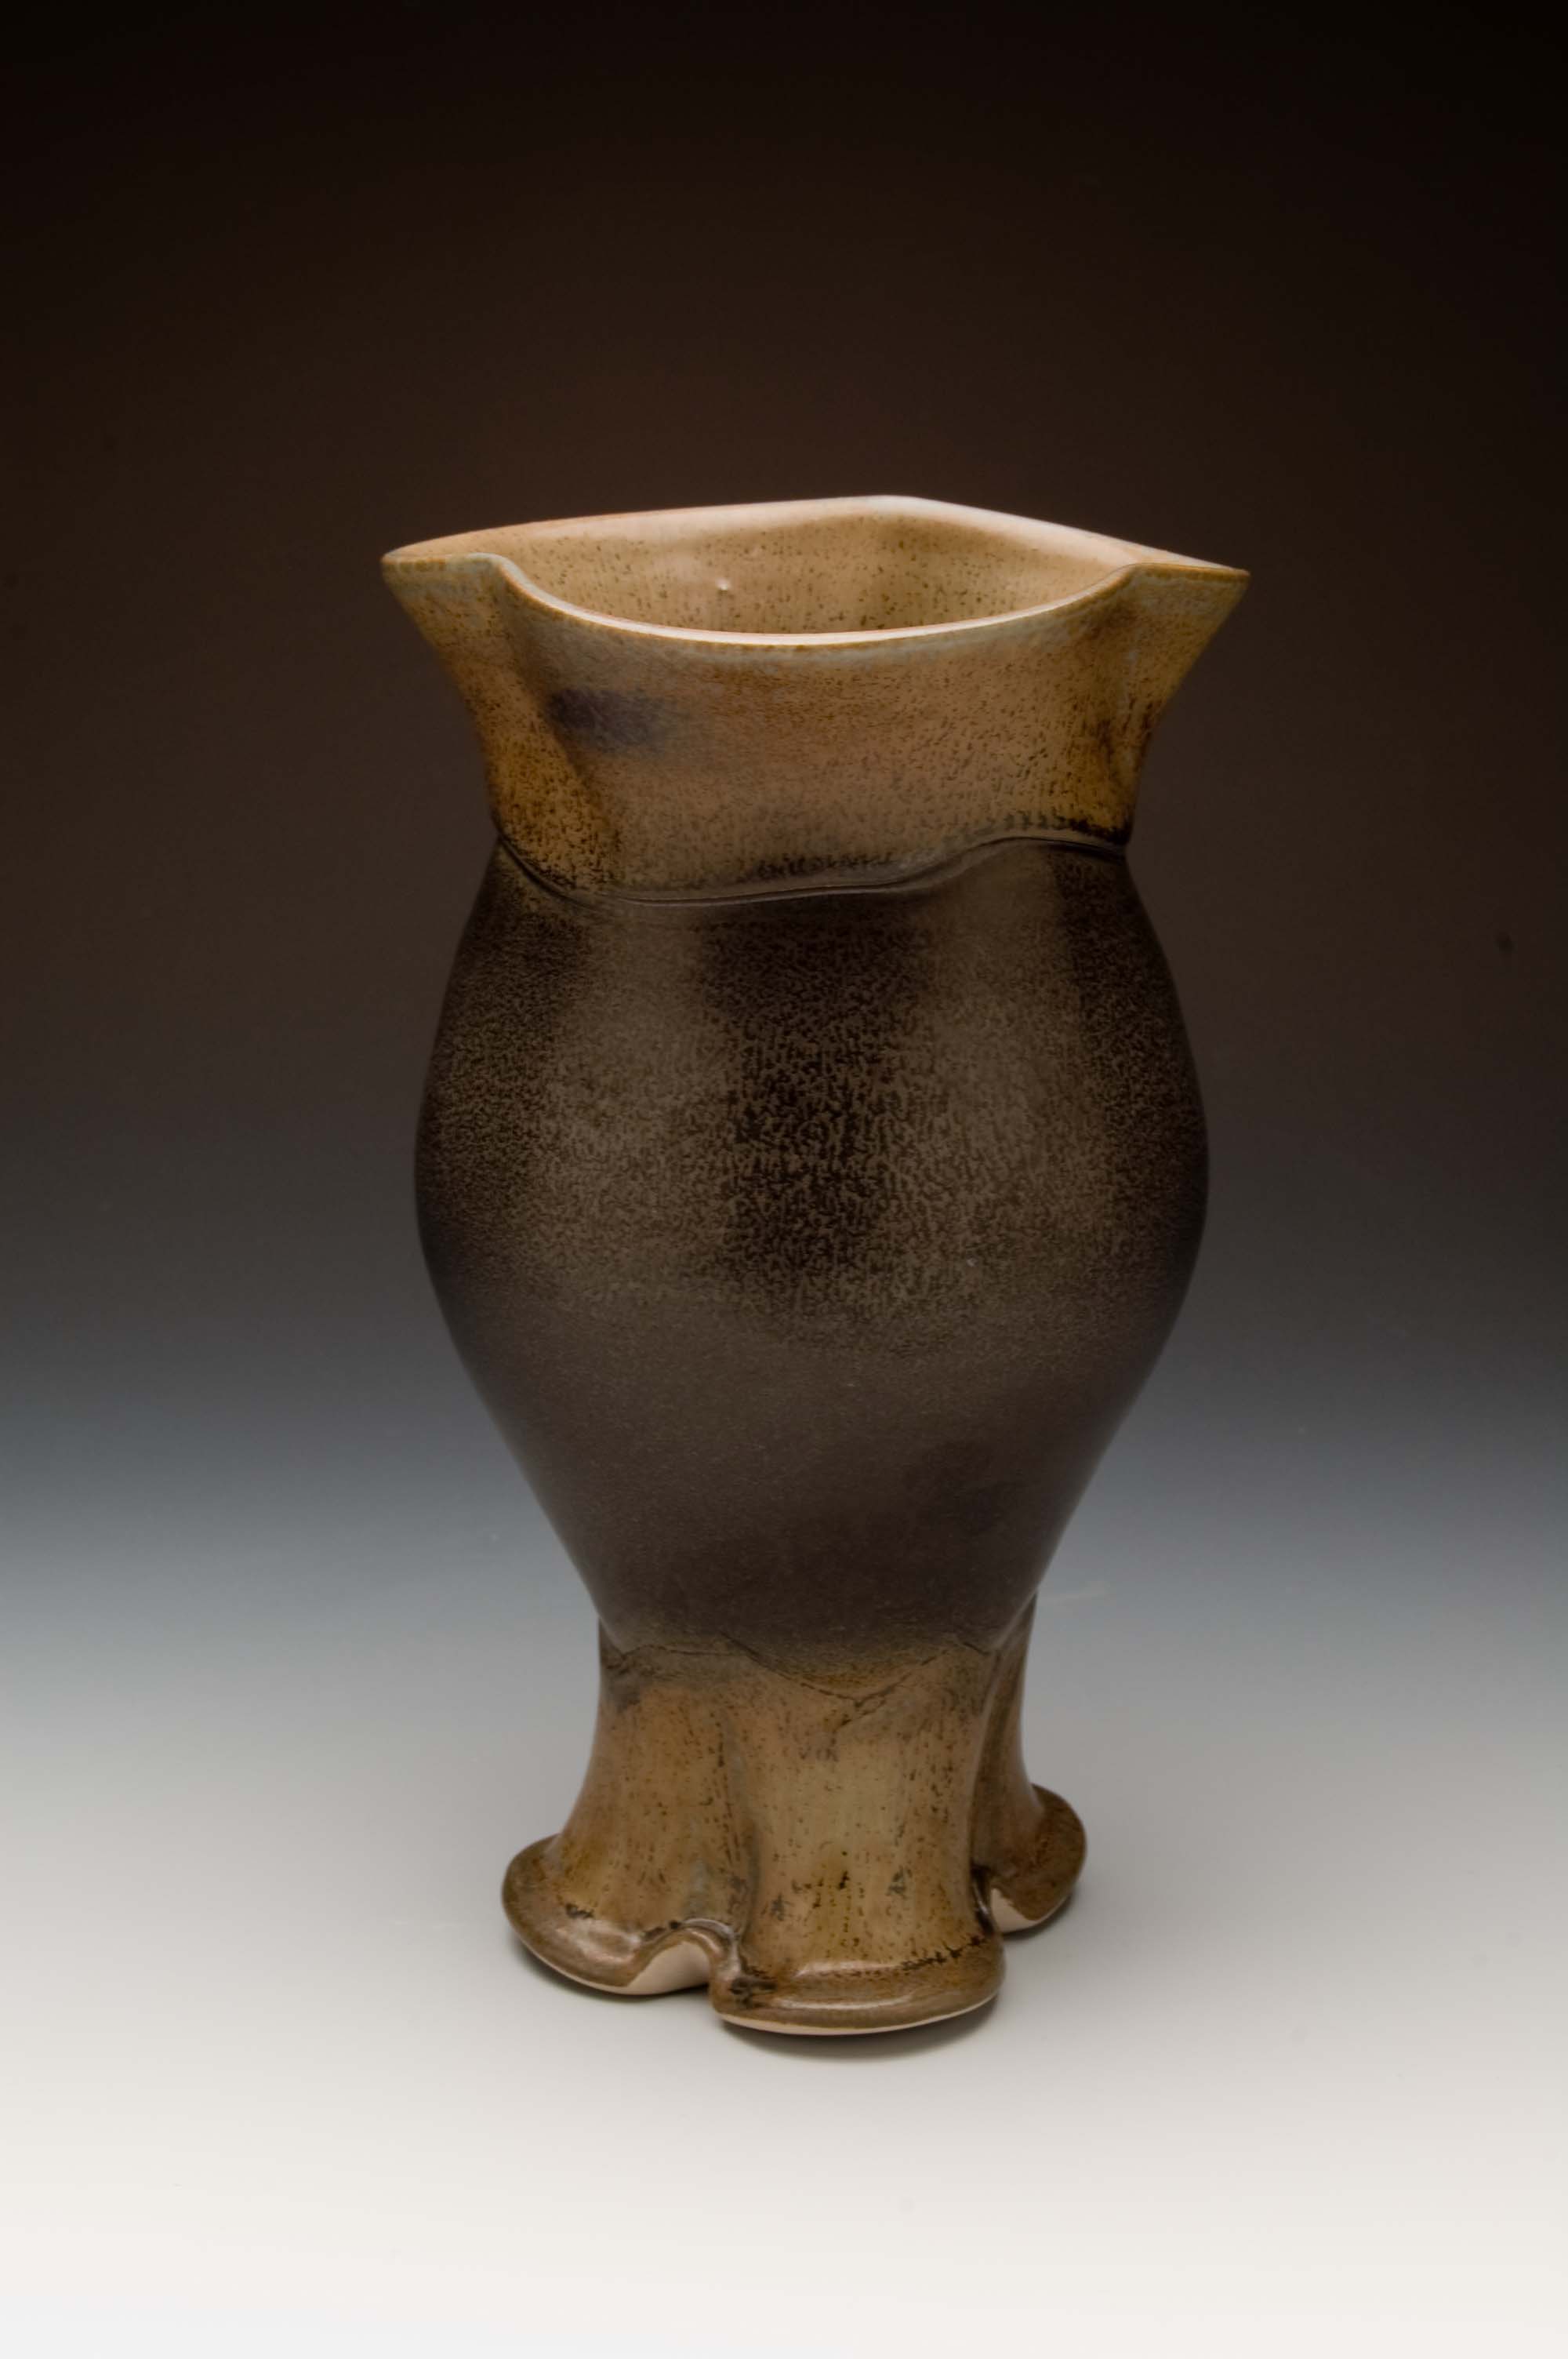 exhibition at ogden museum of southern craft and design by conner burns